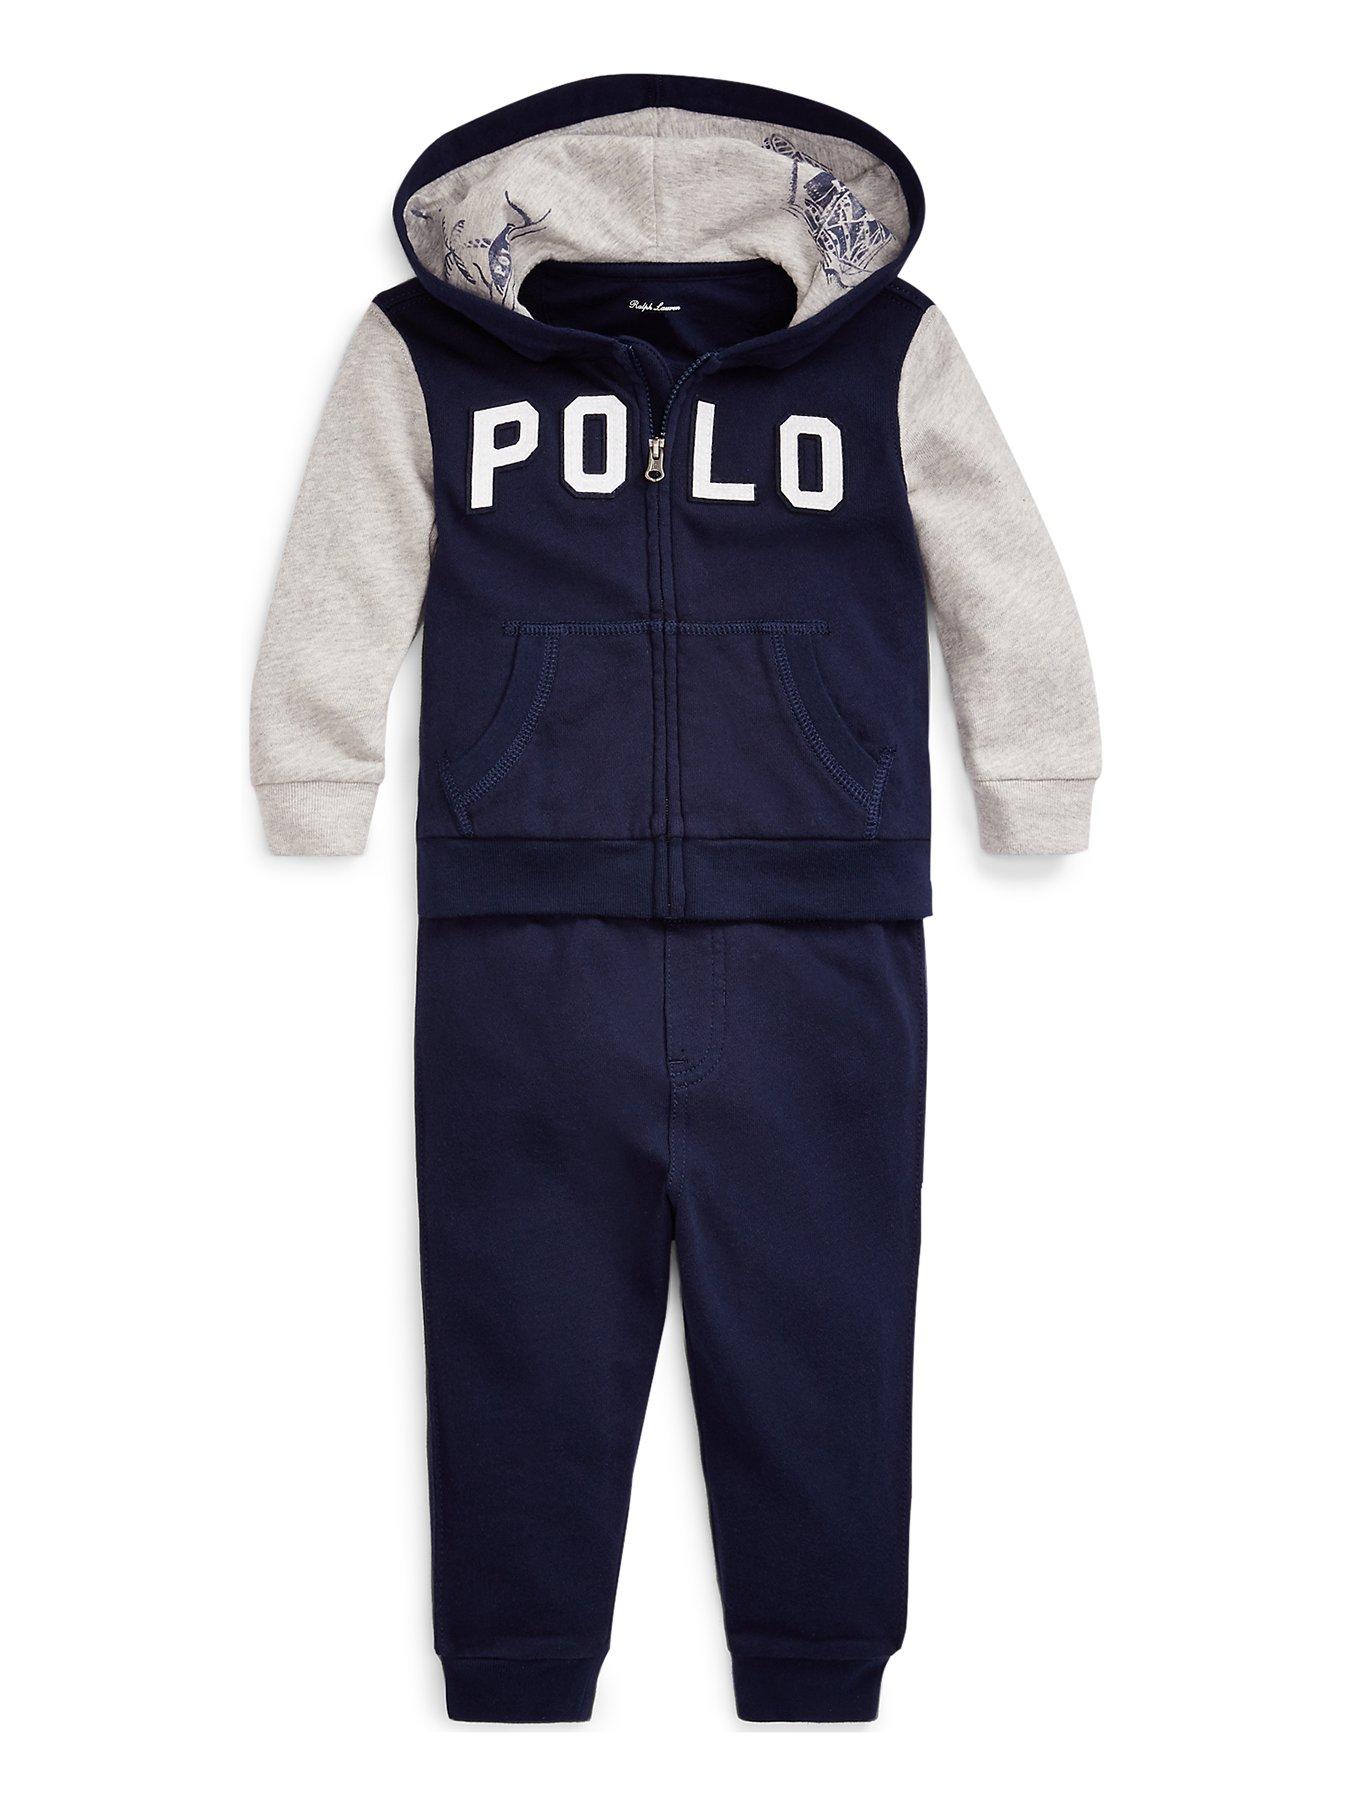 polo jogging suits for toddlers